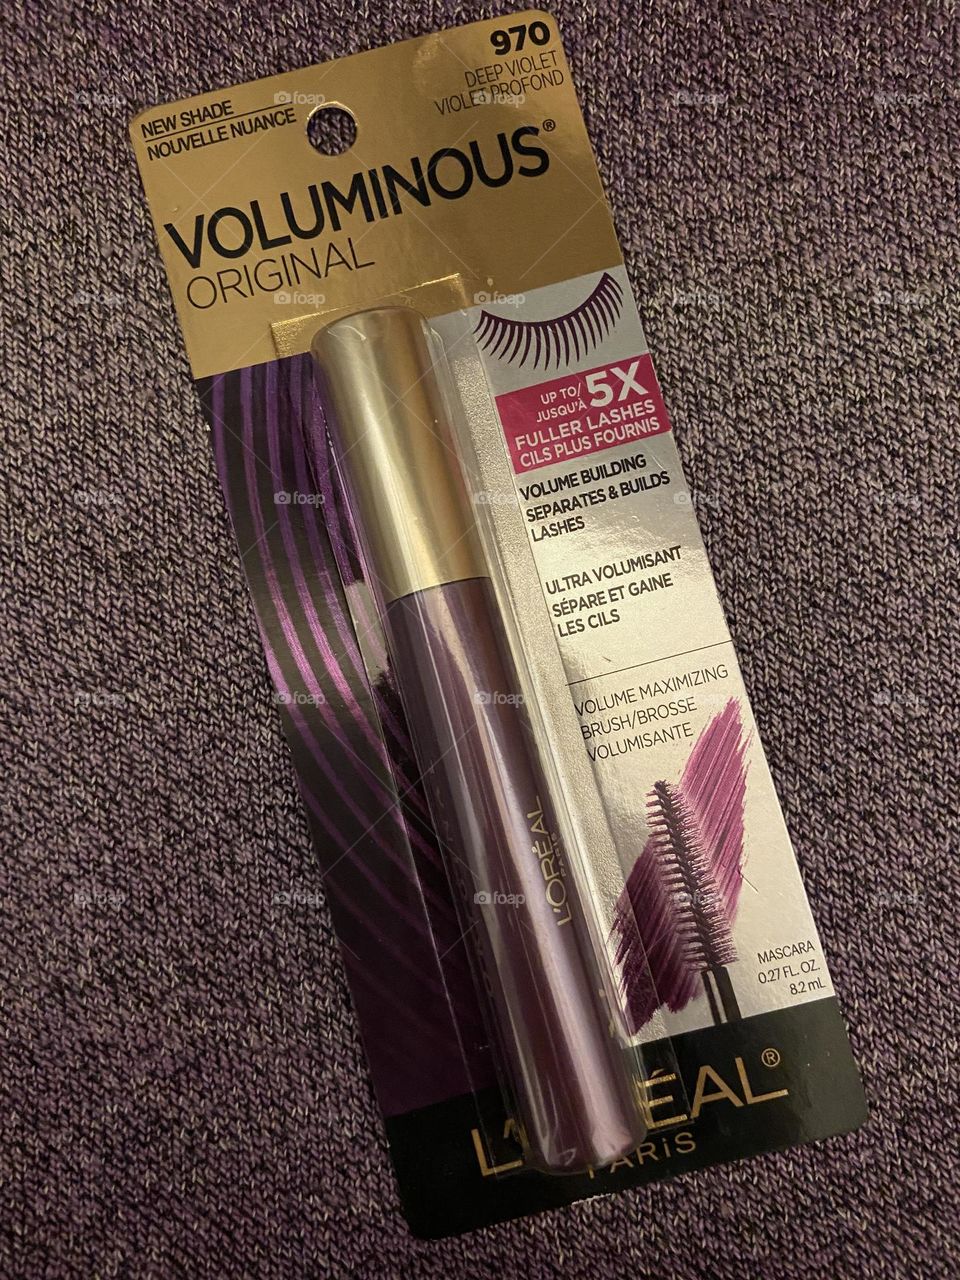 L’Oréal Voluminous Mascara in Deep Violet against a violet/gray background. These colored mascaras are fun but also not too over-the-top. Since they go on black lashes, they just add an accent that to me is a nice change from traditional black. 